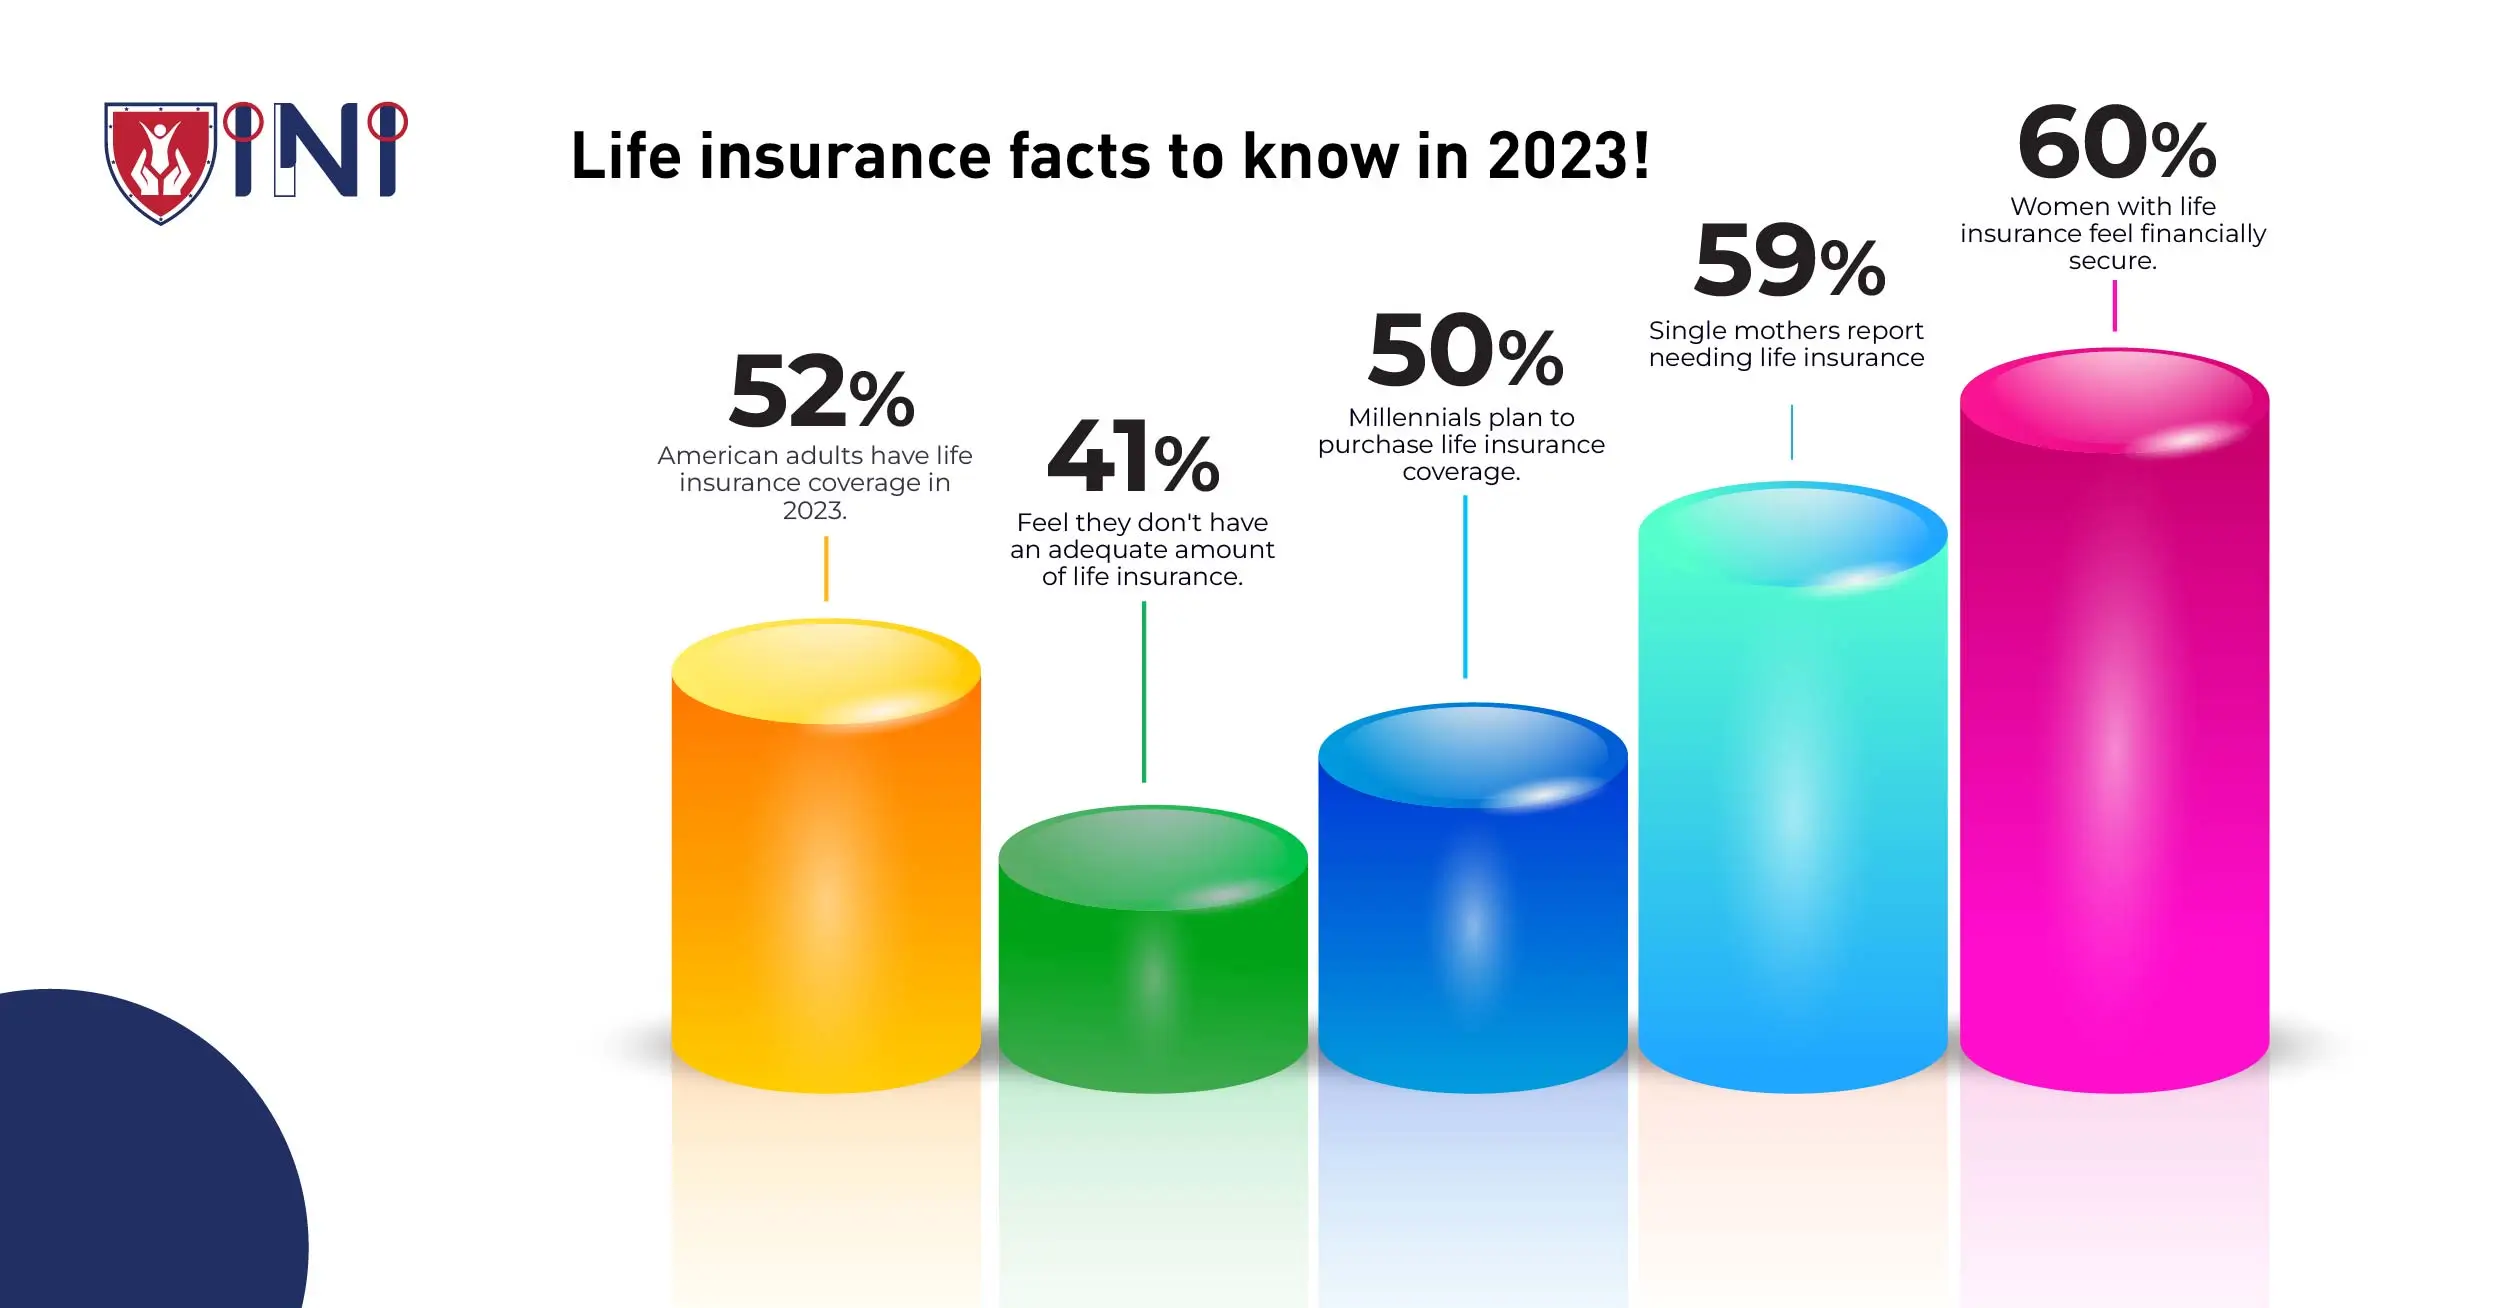 Life insurance facts to know in 2023!